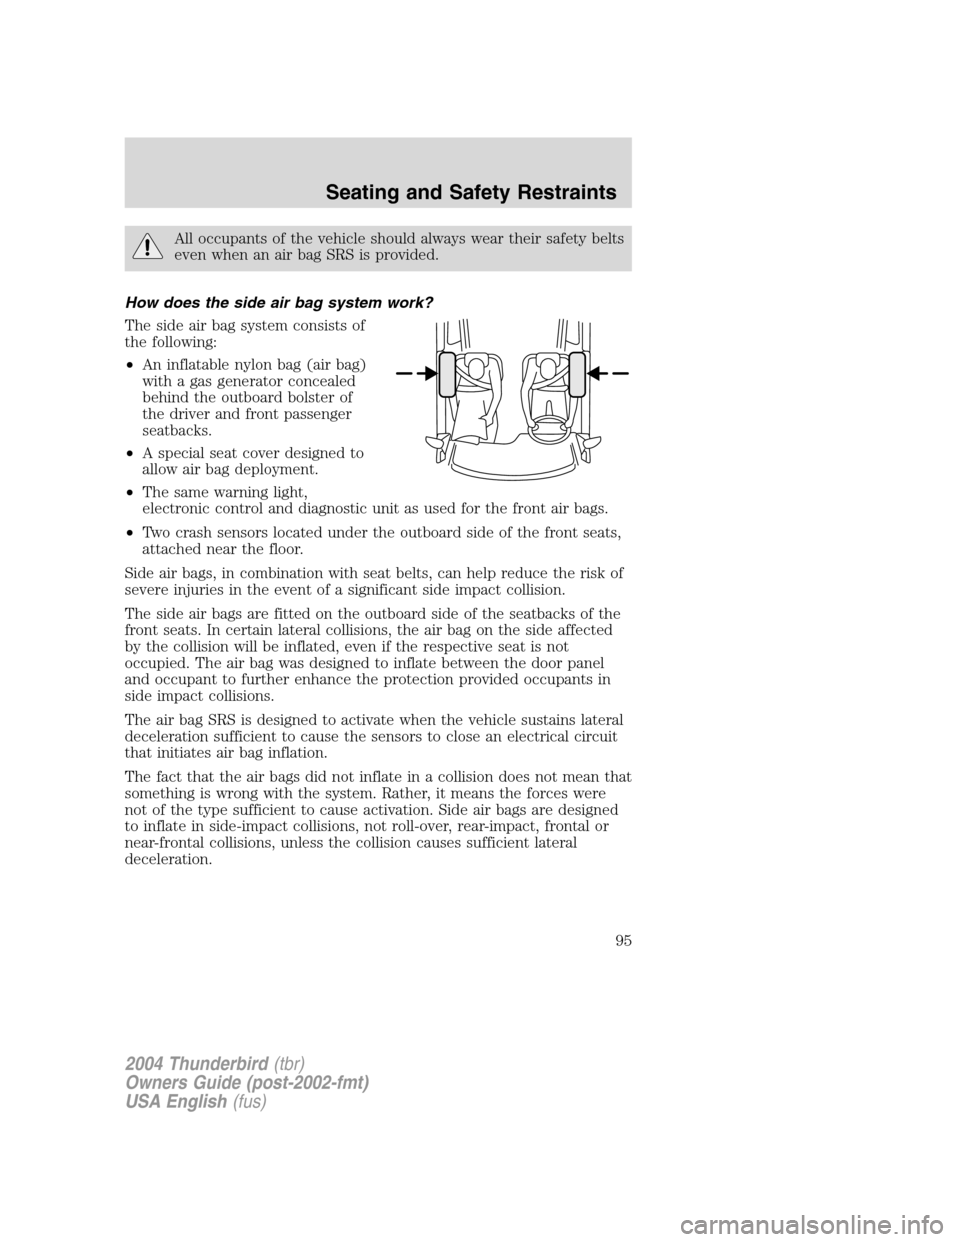 FORD THUNDERBIRD 2004 11.G Owners Manual All occupants of the vehicle should always wear their safety belts
even when an air bag SRS is provided.
How does the side air bag system work?
The side air bag system consists of
the following:
• A